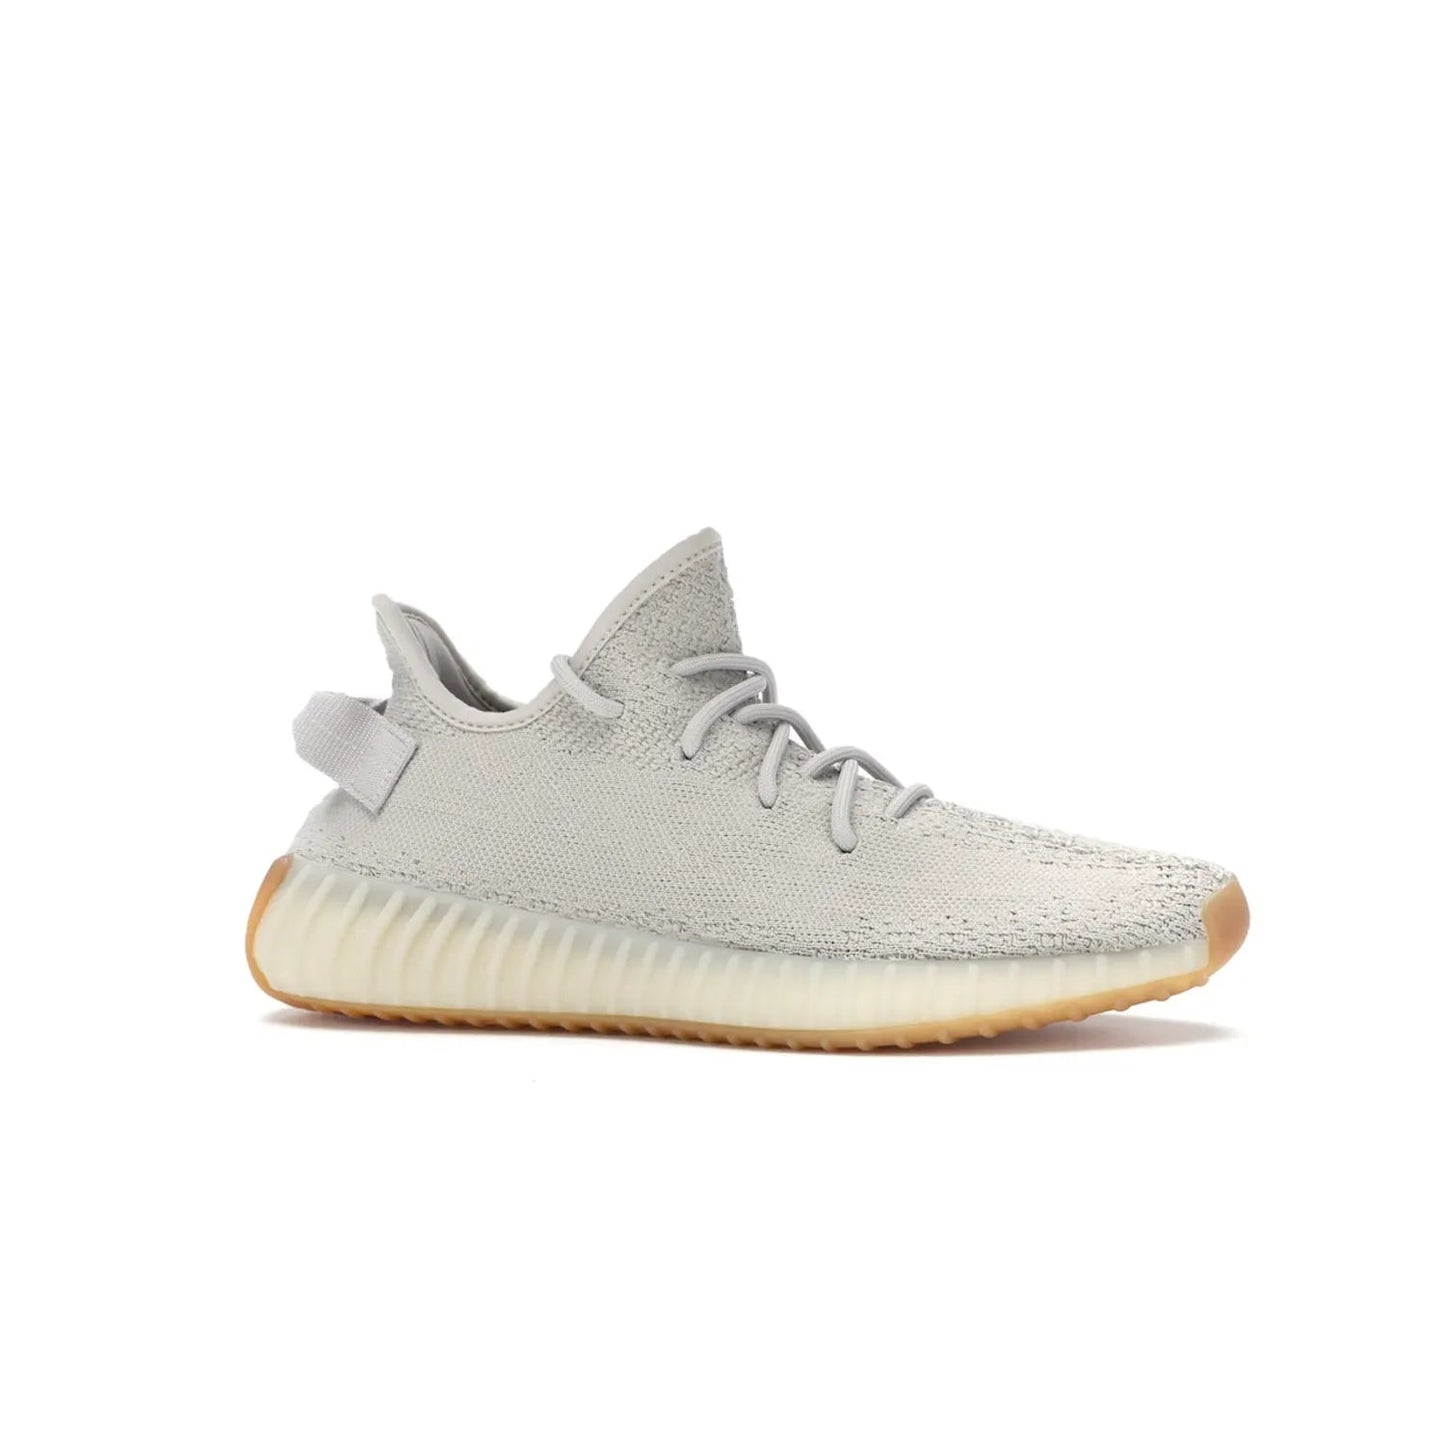 adidas Yeezy Boost 350 V2 Sesame - Image 3 - Only at www.BallersClubKickz.com - Introducing the adidas Yeezy Boost 350 V2 Sesame. Featuring a sesame upper, midsole and gum sole for a sleek silhouette. Cop the stylish sneaker released in November 2018.